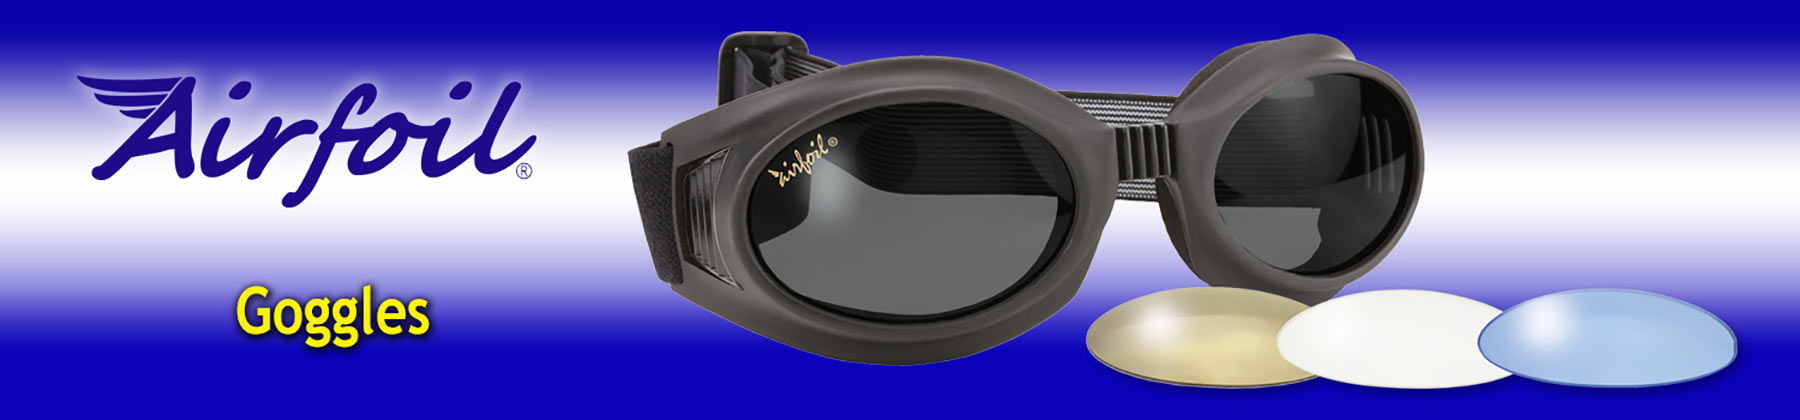 Gold Airfoil Goggles 7600 4 Interchangeable Lens Smoke Blue Clear